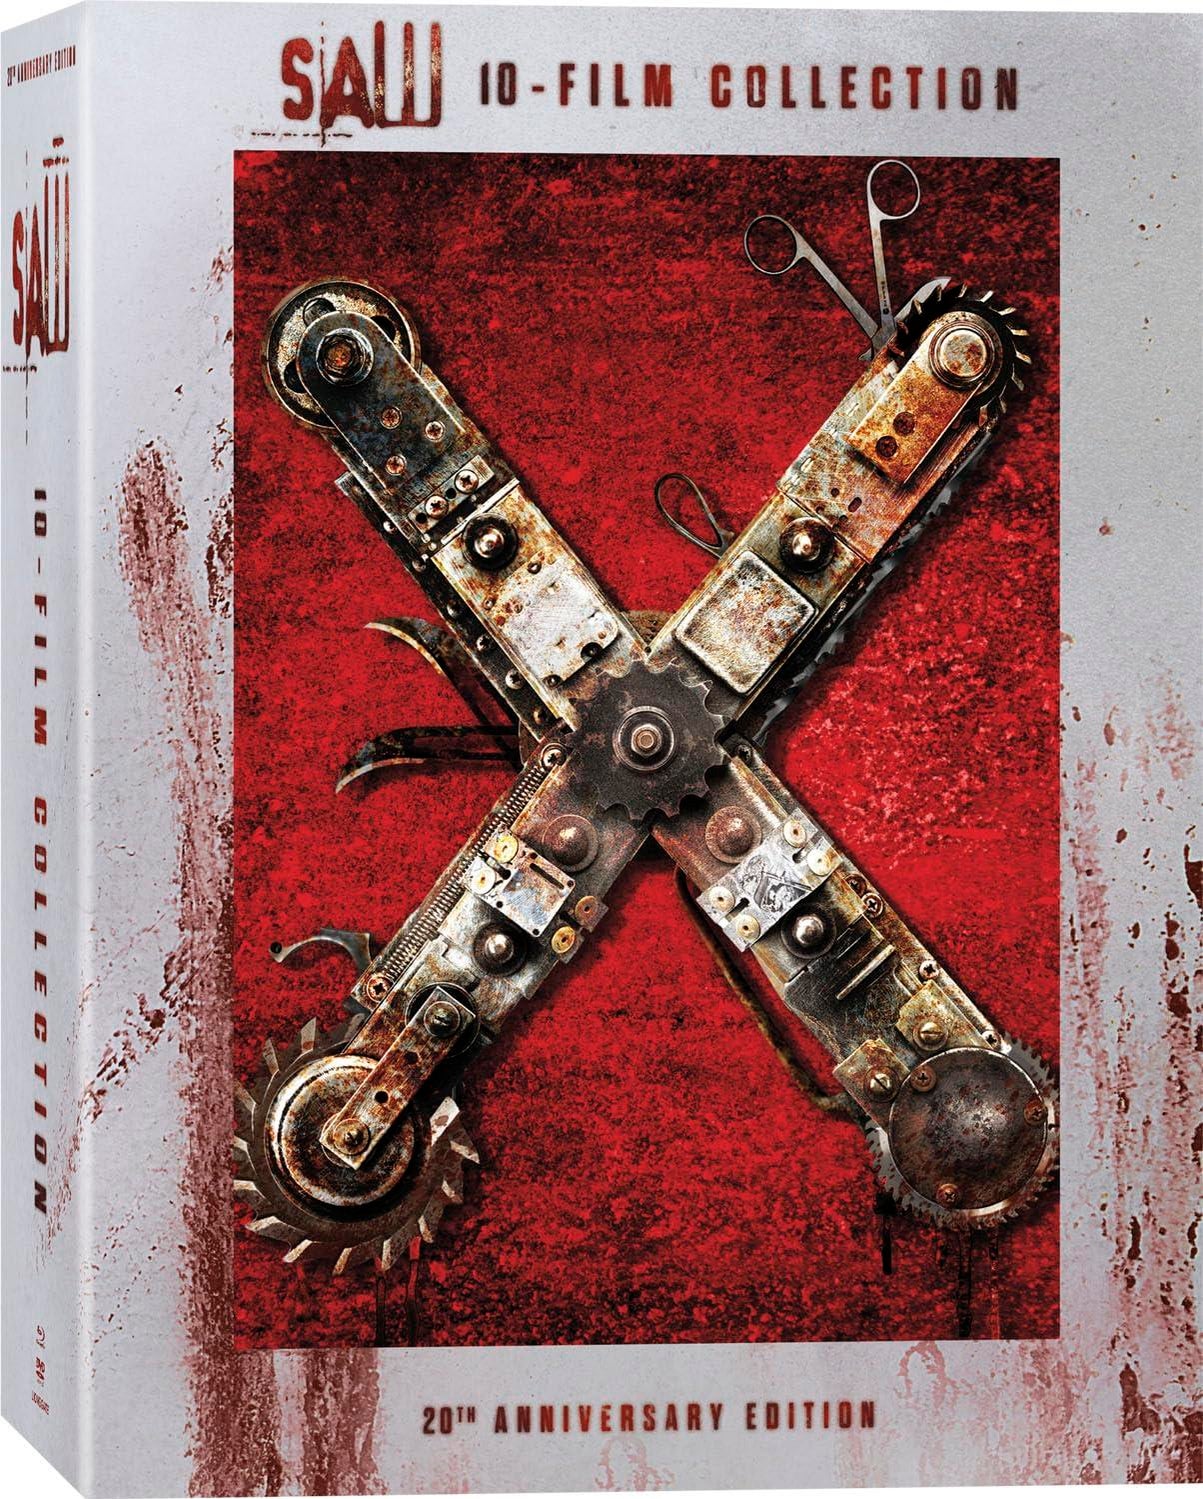 saw x: Saw X and other films to be released with 10 Blu-ray movies ahead of  Saw 11 - The Economic Times